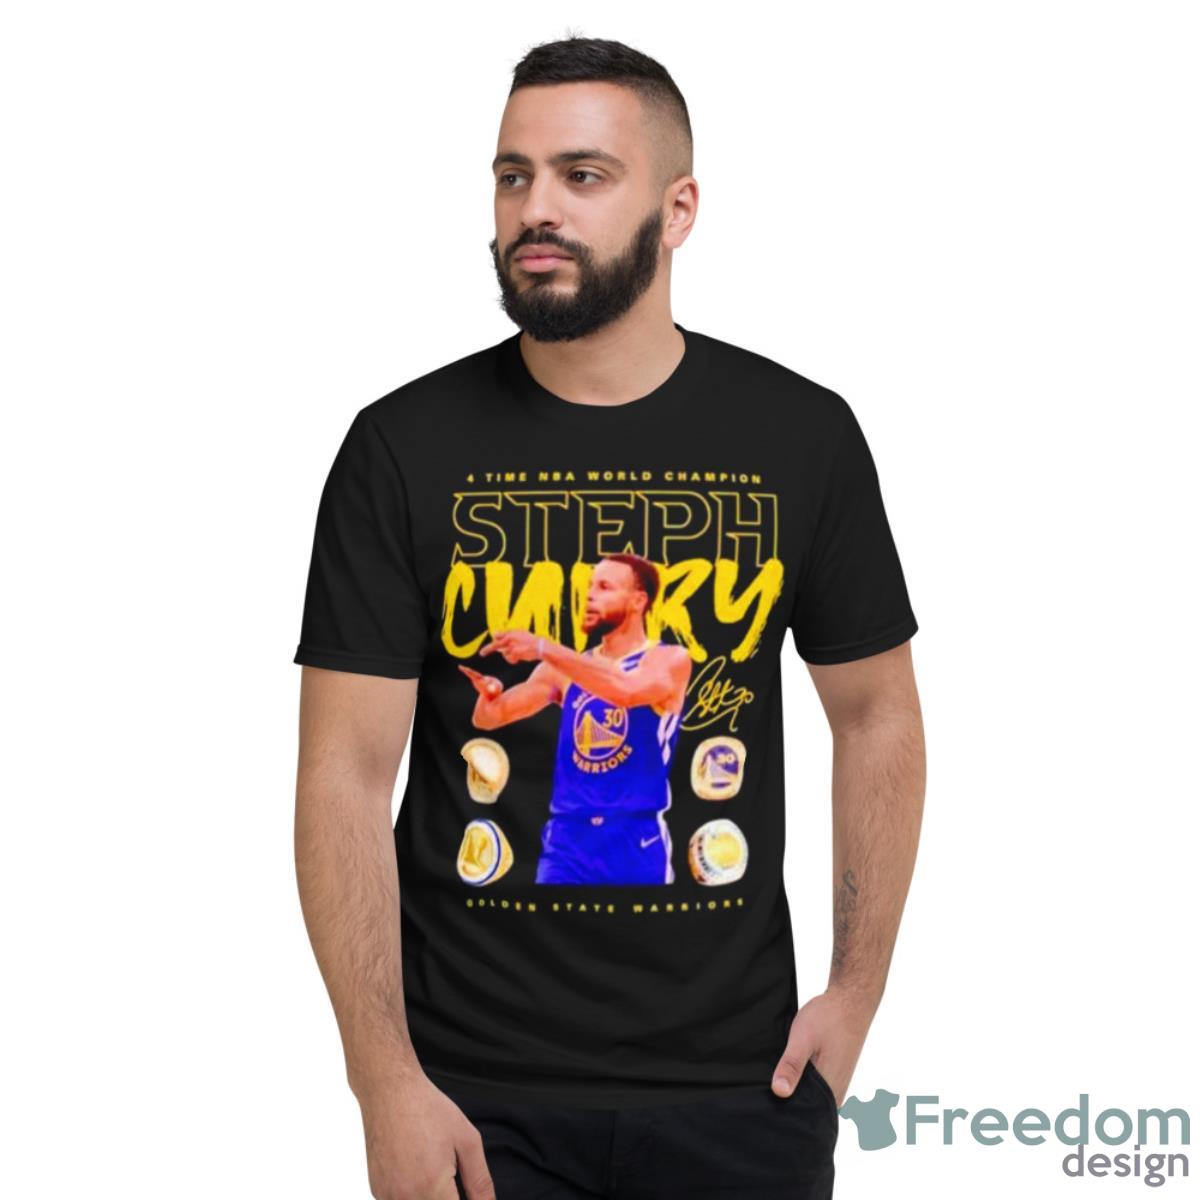 Steph Curry Golden State Warriors 4 Time Nba World Champion Rings Shirt